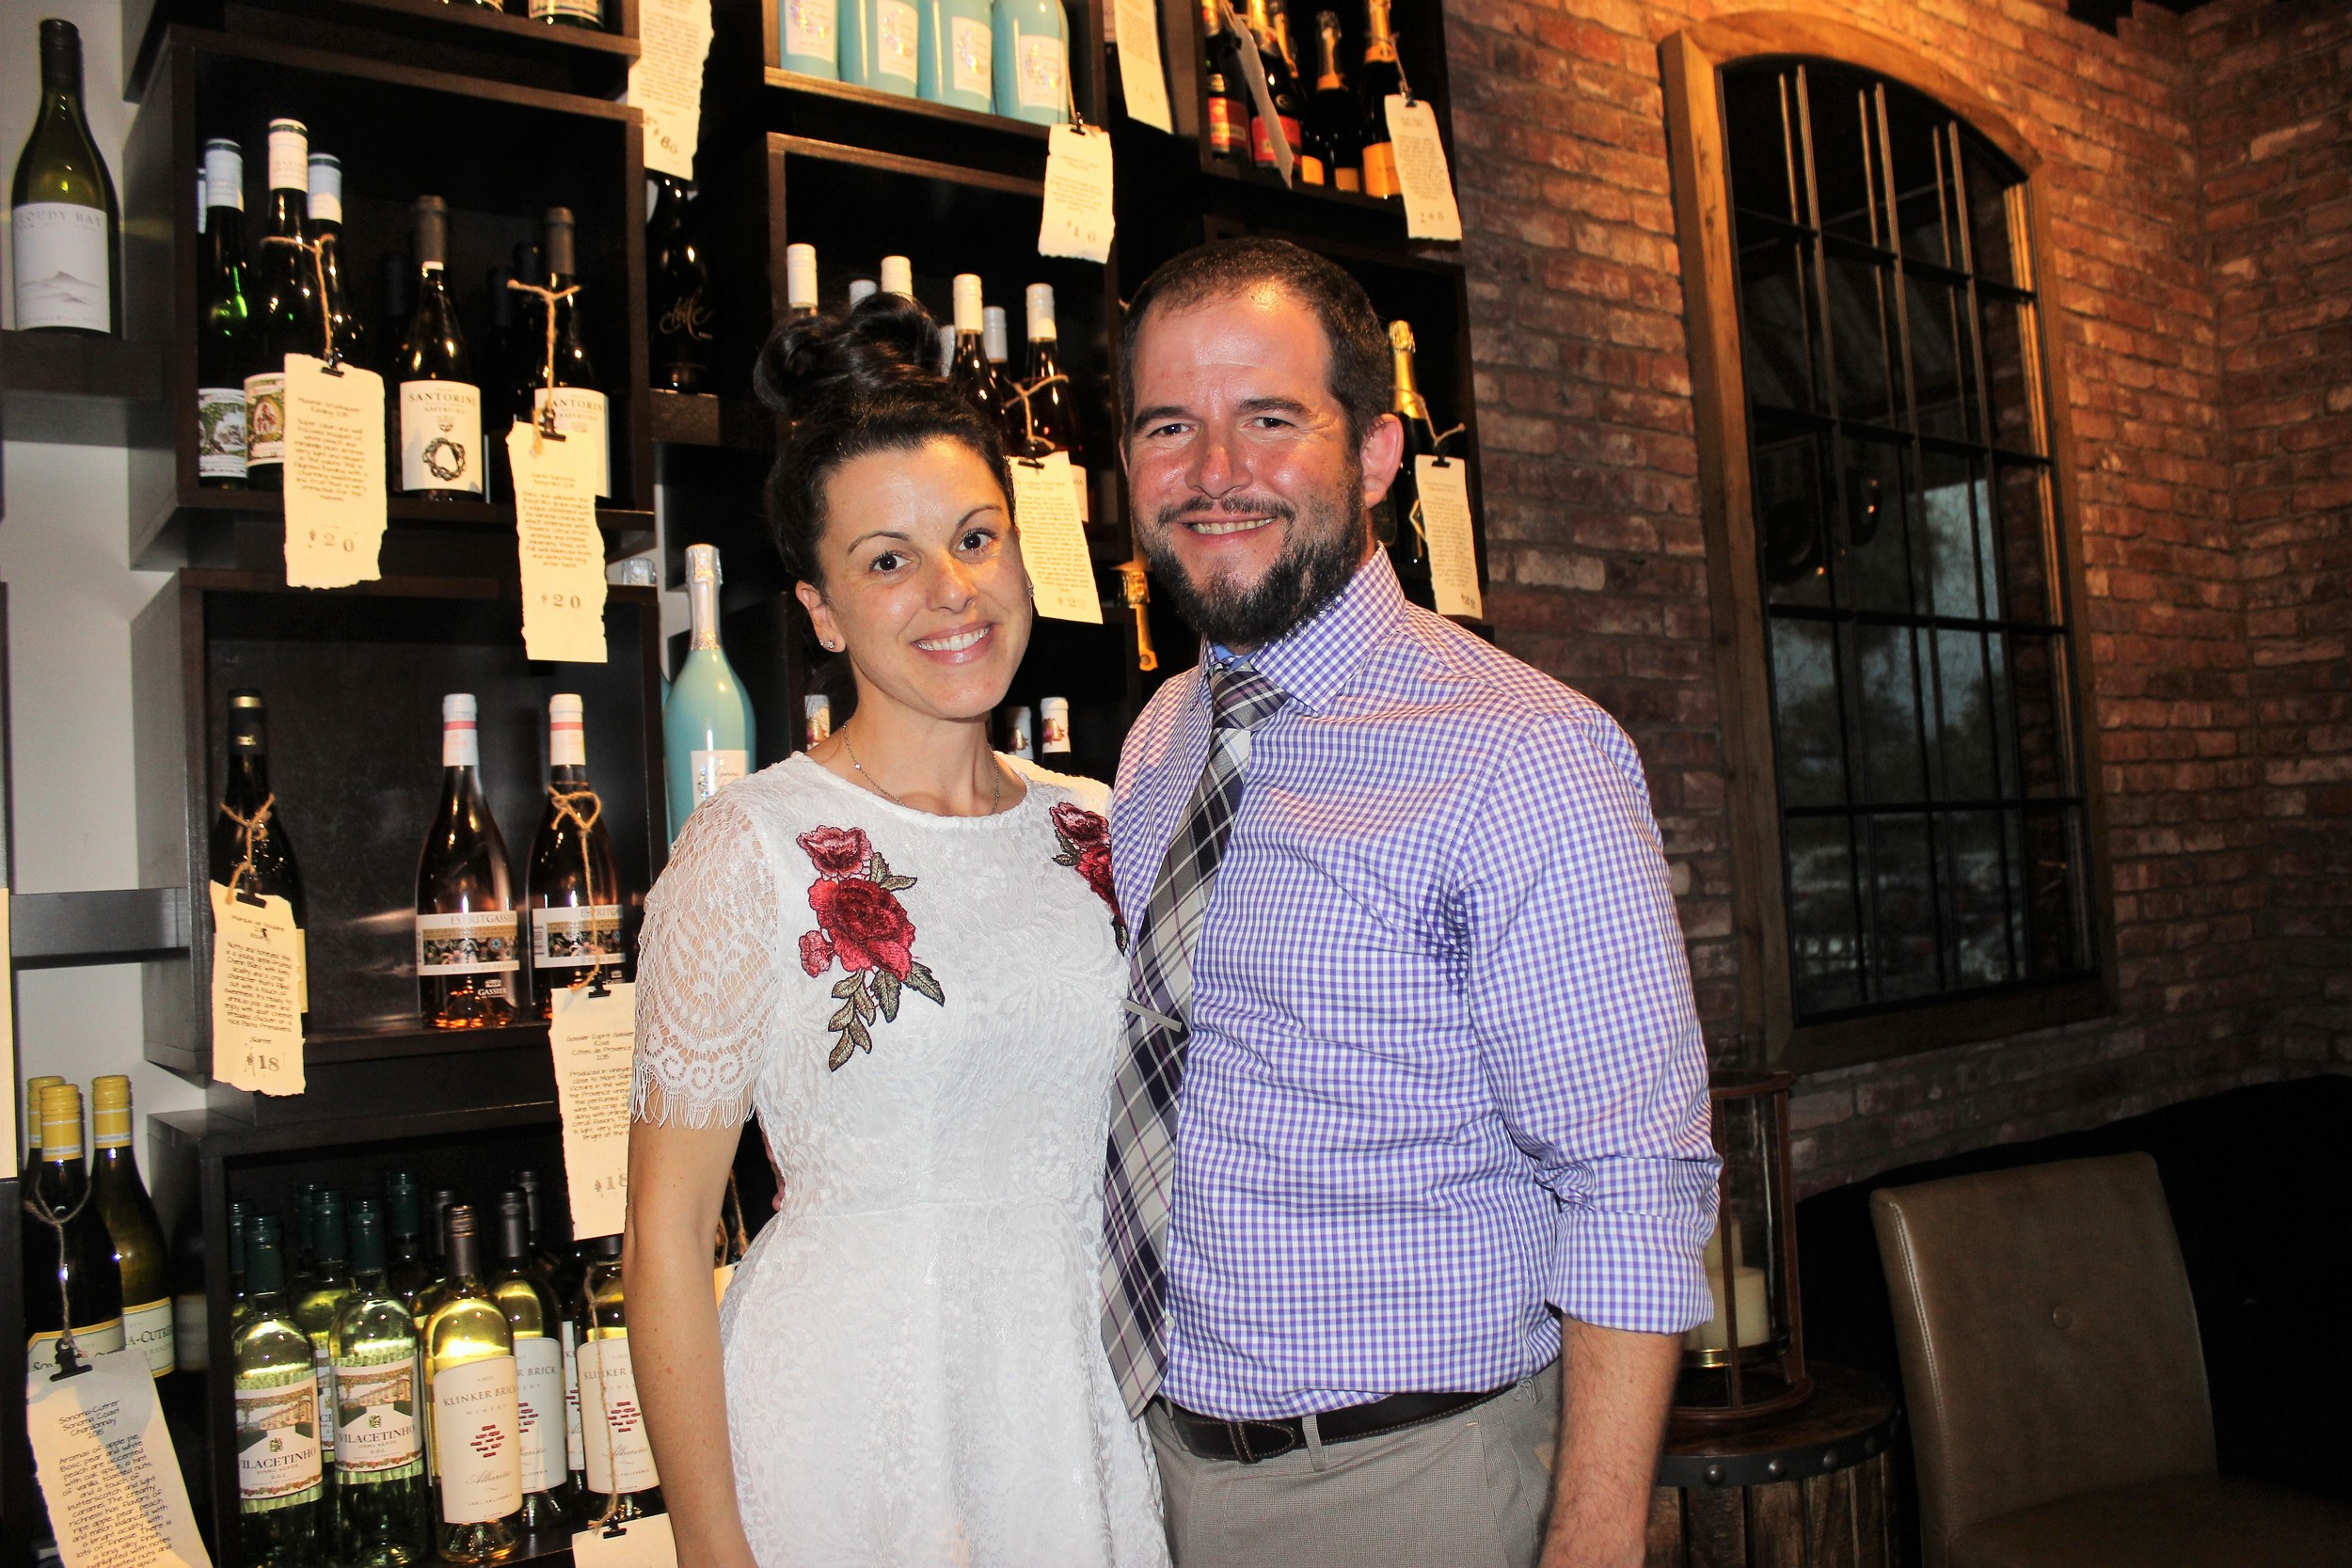 Shaun and Steve Lourie celebrate the first anniversary of their shop, Coastal Wine Market & tasting room, located at 641 Crosswater Parkway in Nocatee.